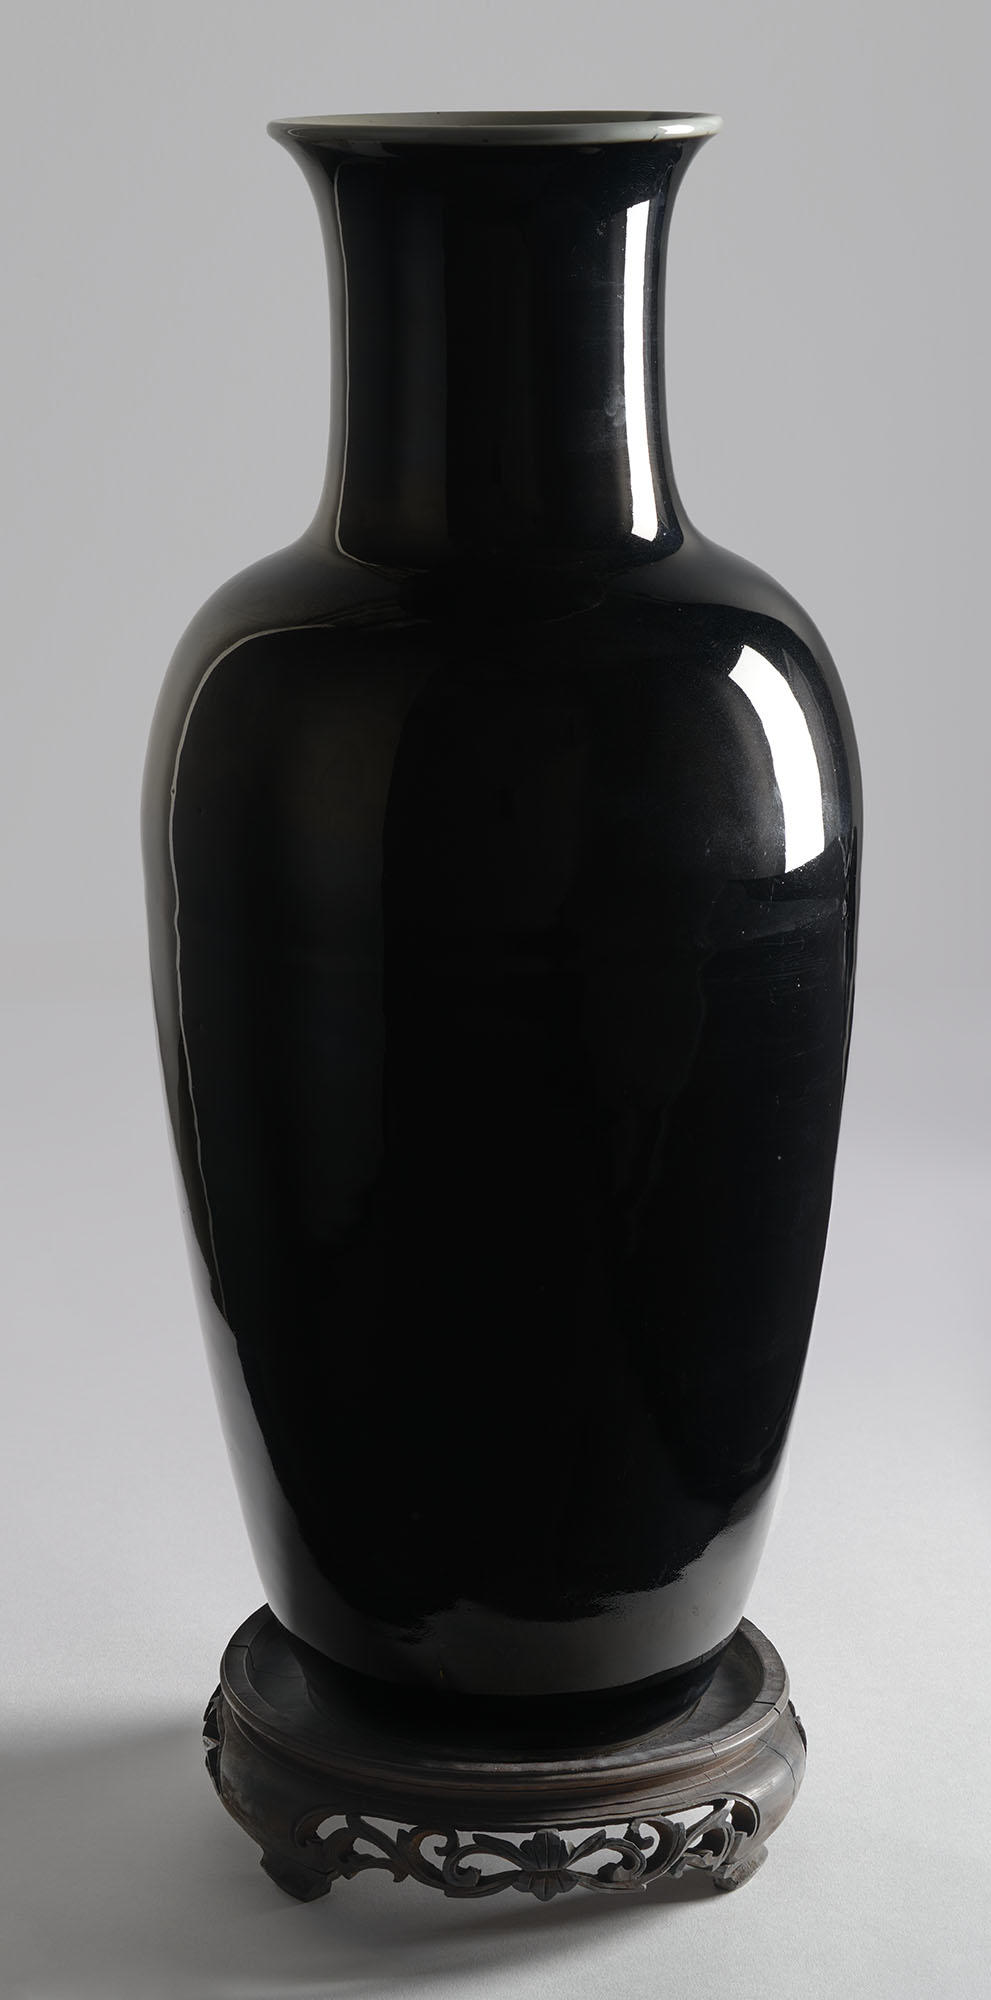 Full view of black vase, taller than it is wide, with a rim that turns outward, a slim neck, and a shoulder that slopes gradually to a narrower base on a wooden stand.